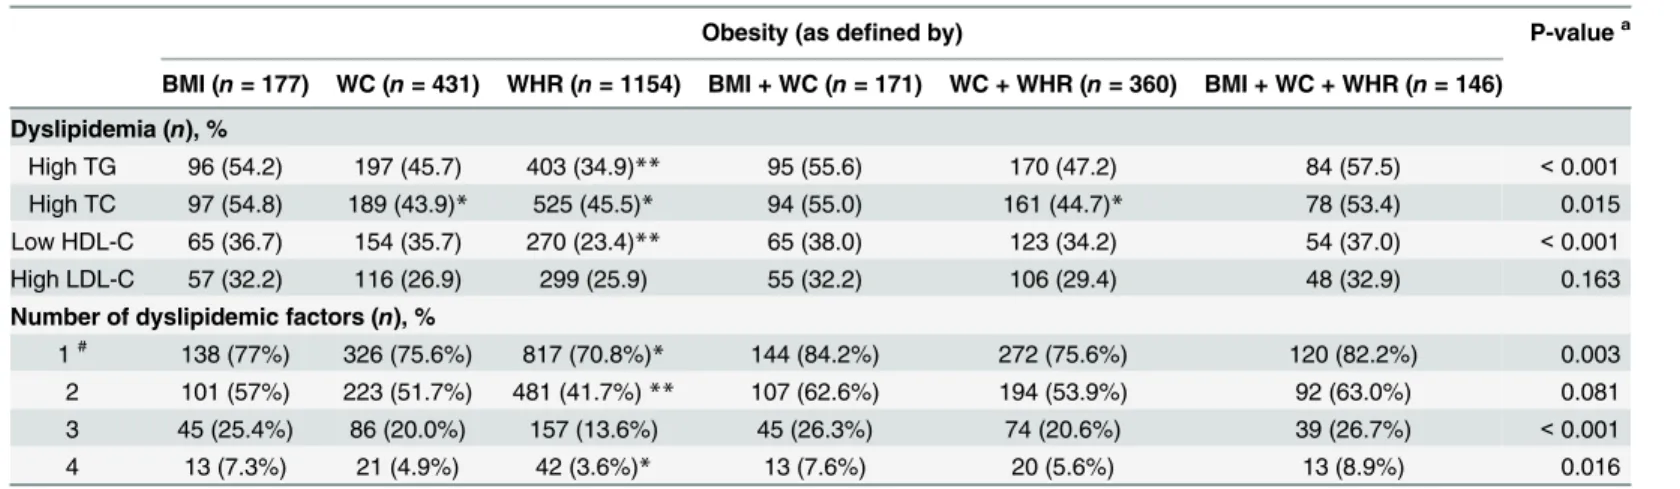 Table 4. Proportion of Lipid Disorders in Children Defined by BMI, WC, and WHR ( n = 2243).